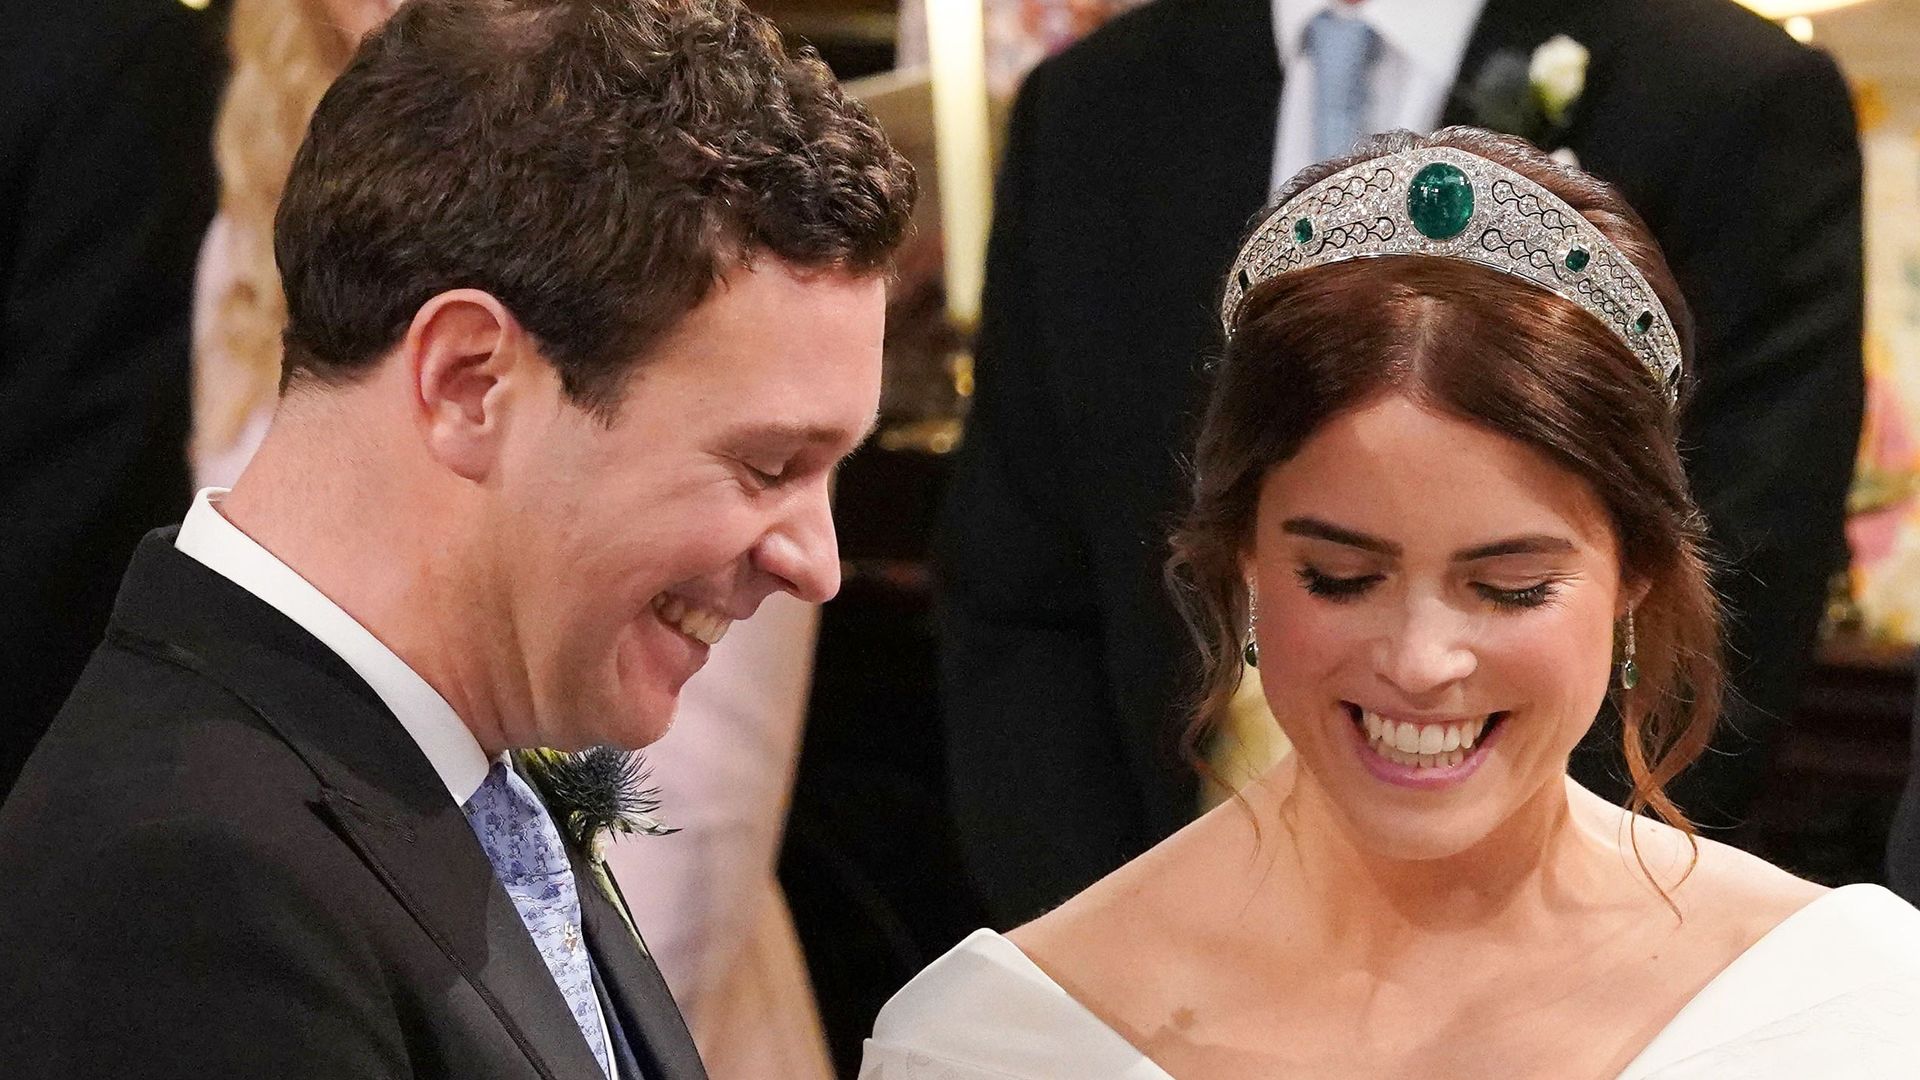 Princess Eugenie and Jack Brooksbank smiling as they exchanged wedding rings